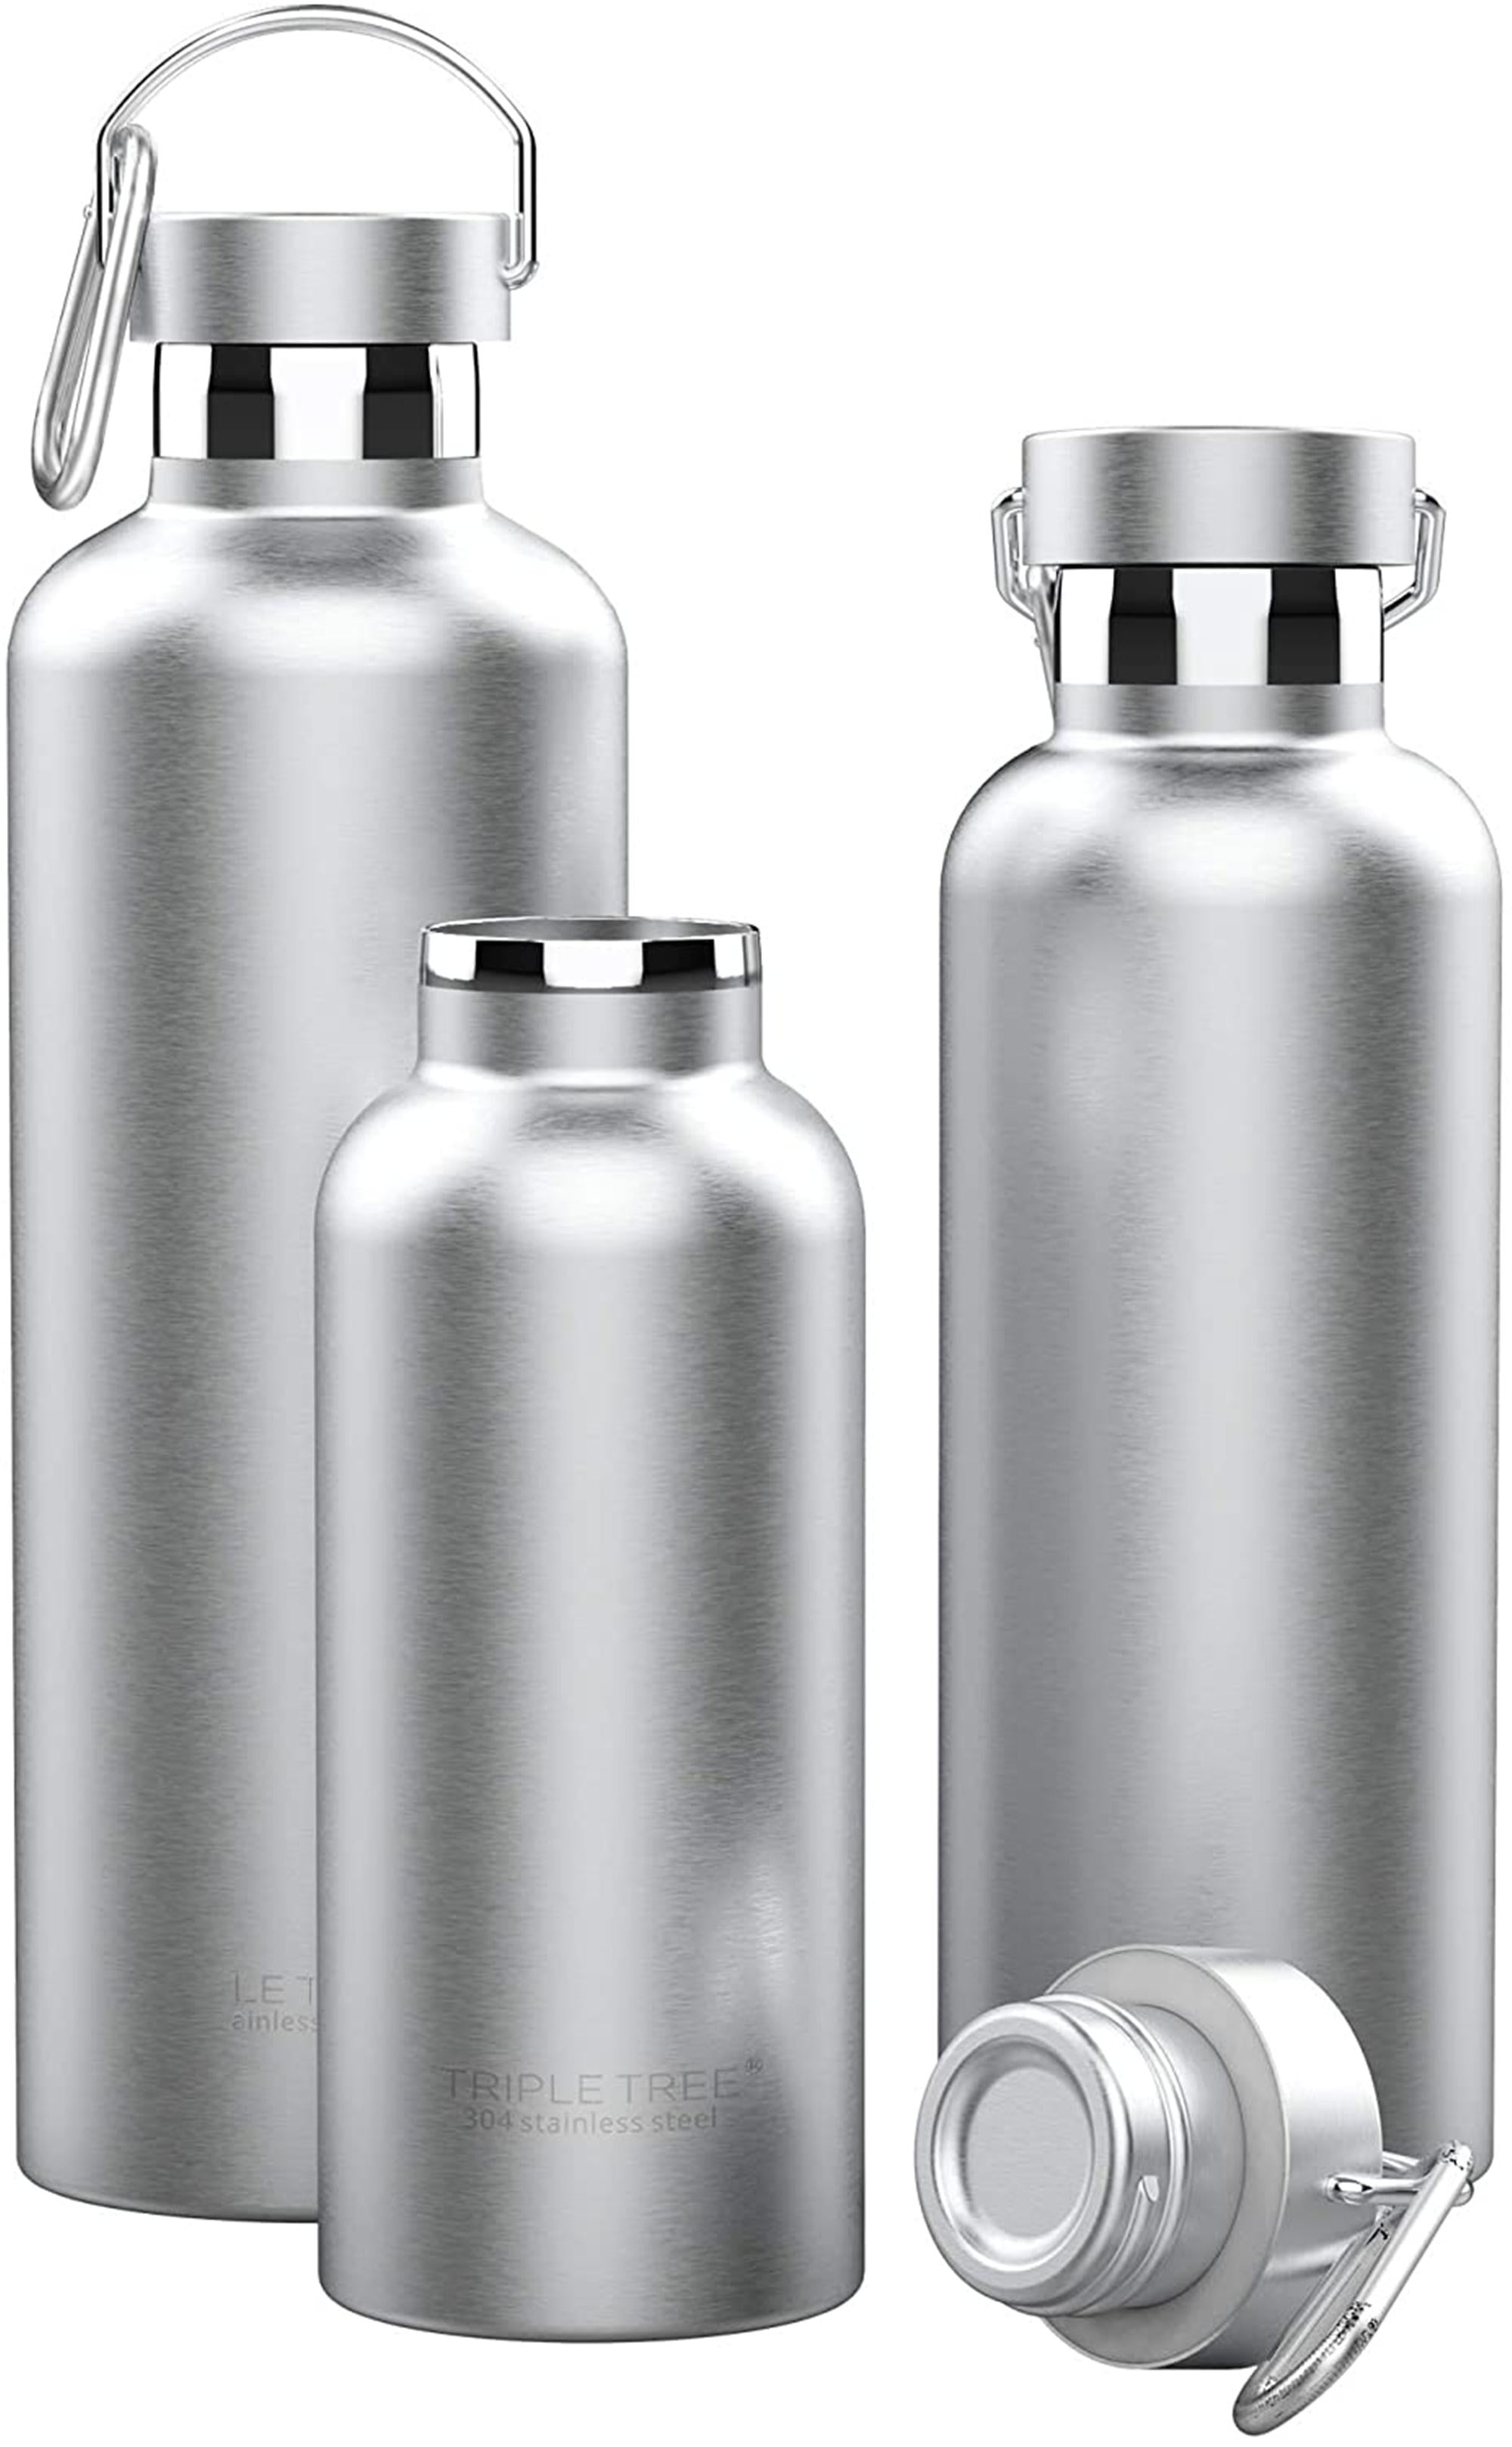 Watersy Triple-Insulated Stainless Steel Water Bottle 17 Ounce /500ml,  Powder Coat Insulated Water Bottles, Keeps Hot and Cold, 100% Leakproof  Lids, Sweatproof Water Bottles, Great for Travel, Picnic& Camping.purple